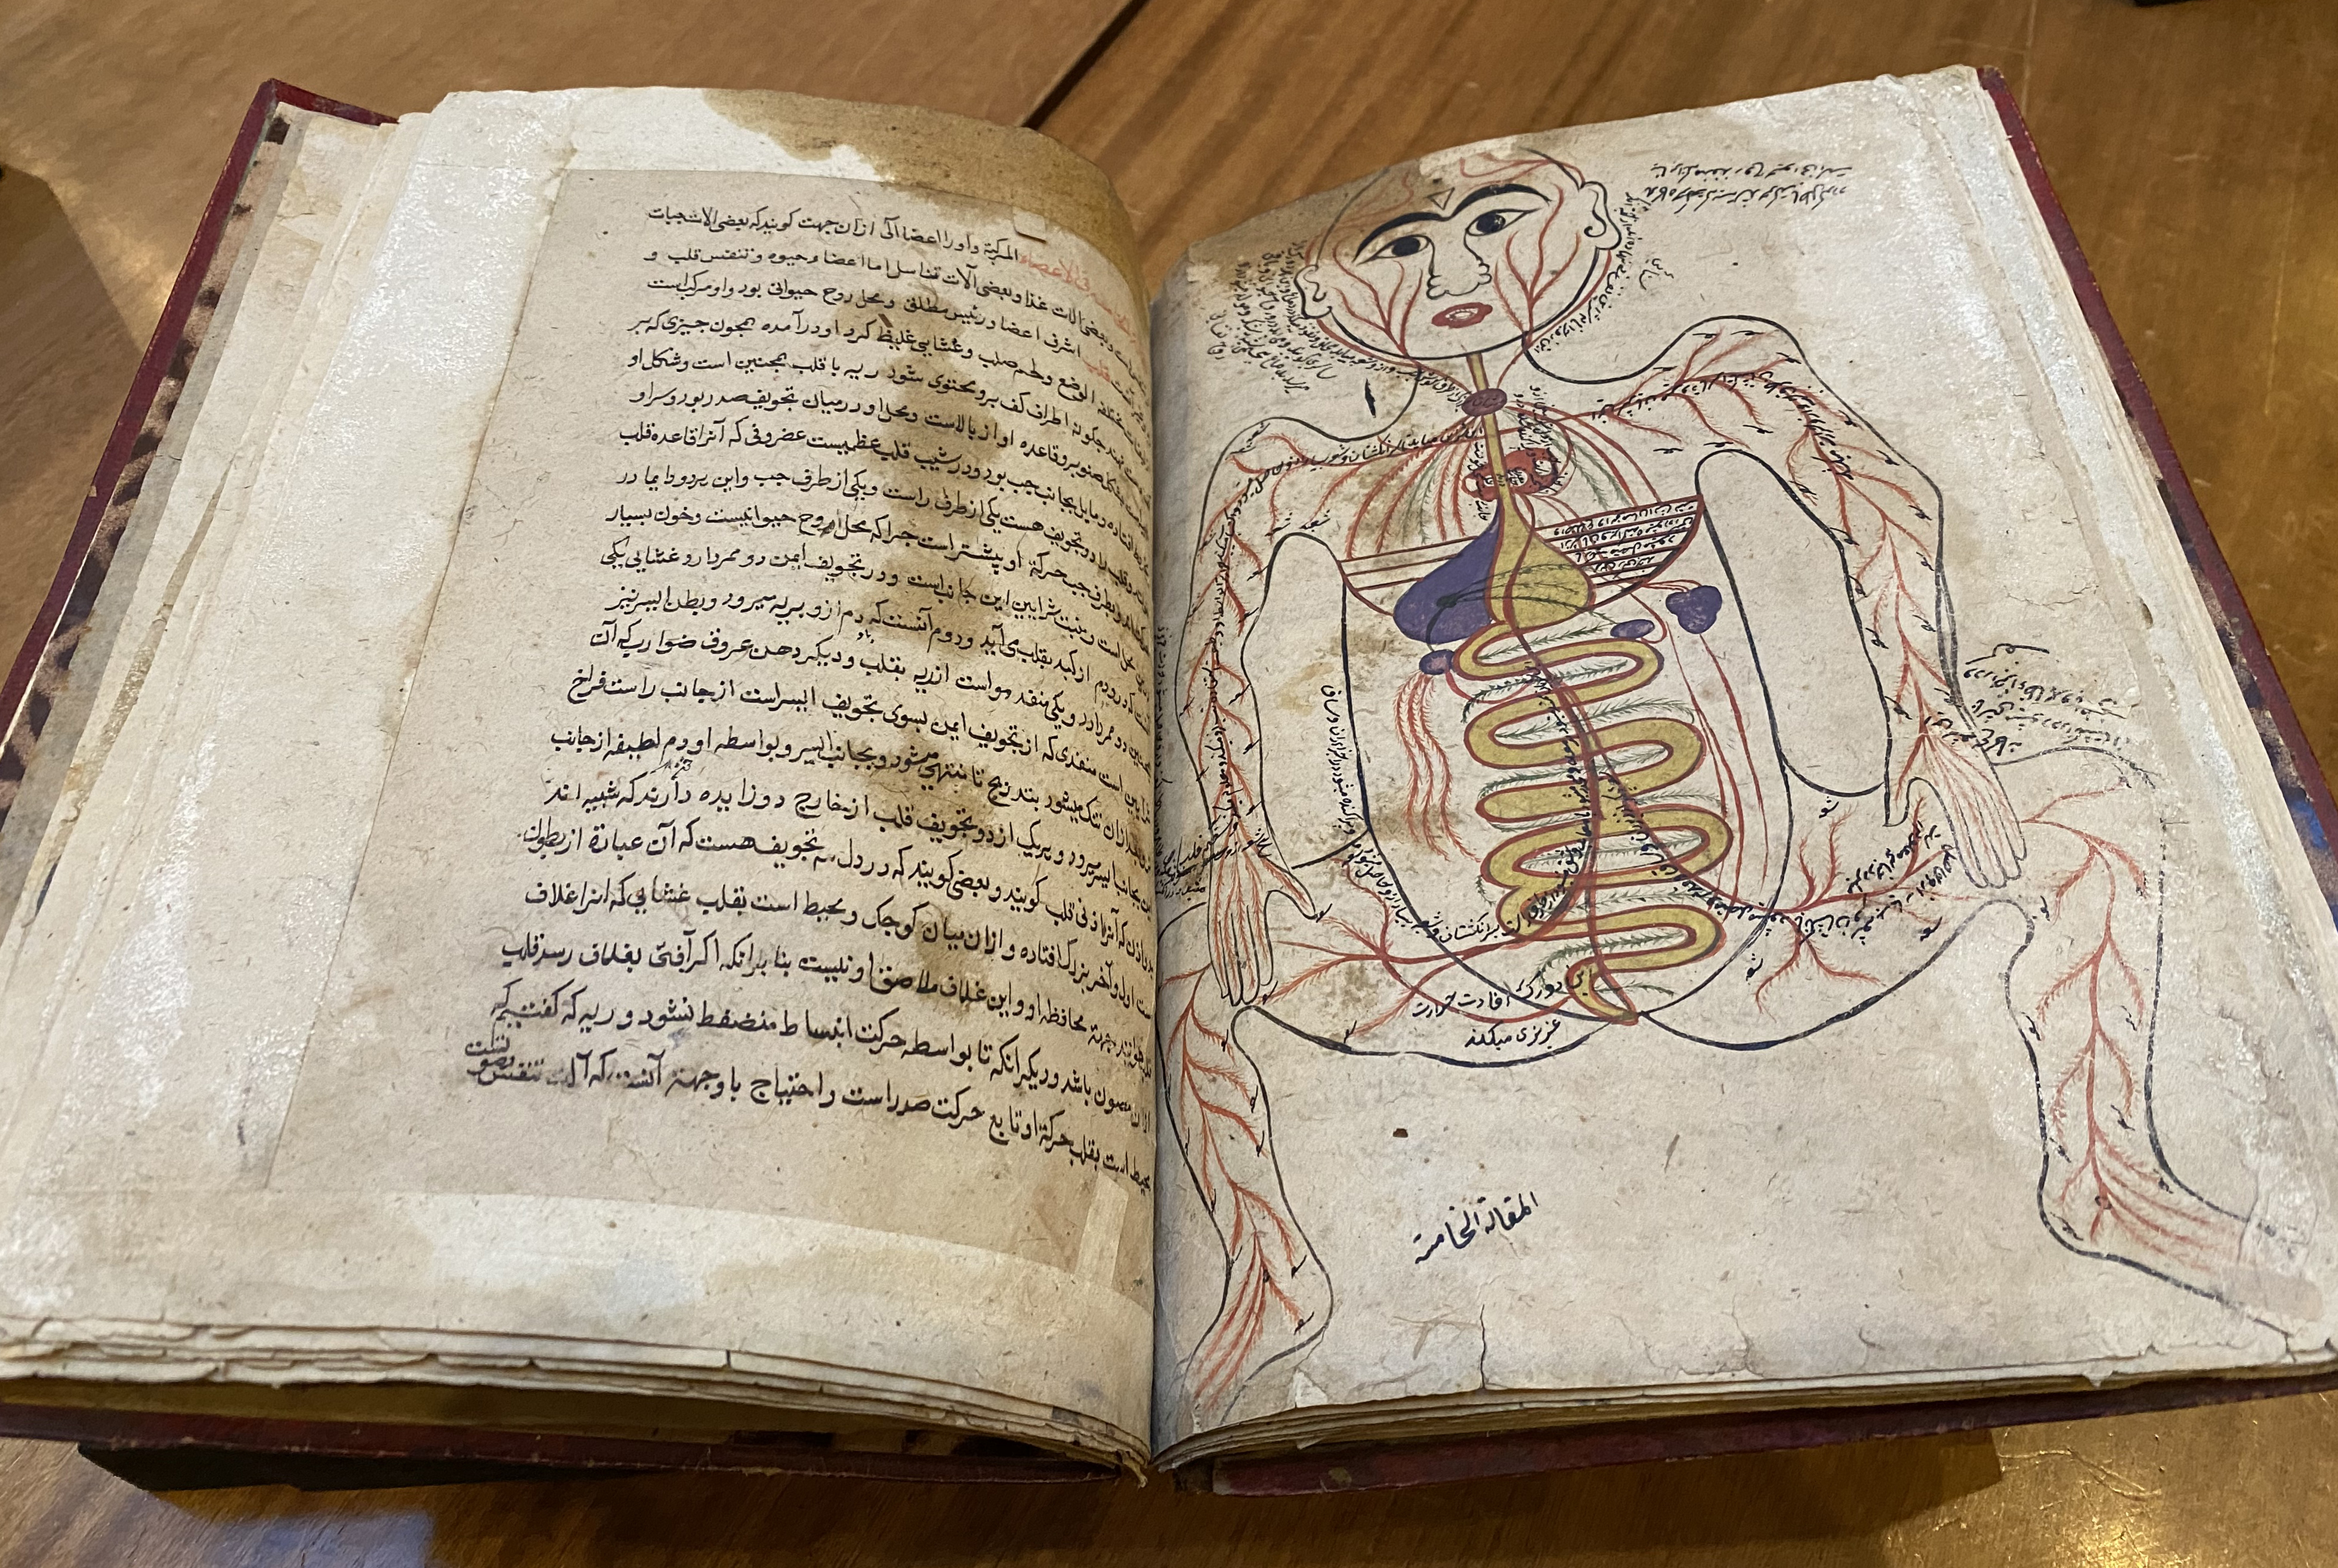 Hand anatomical drawing in an ancient text.